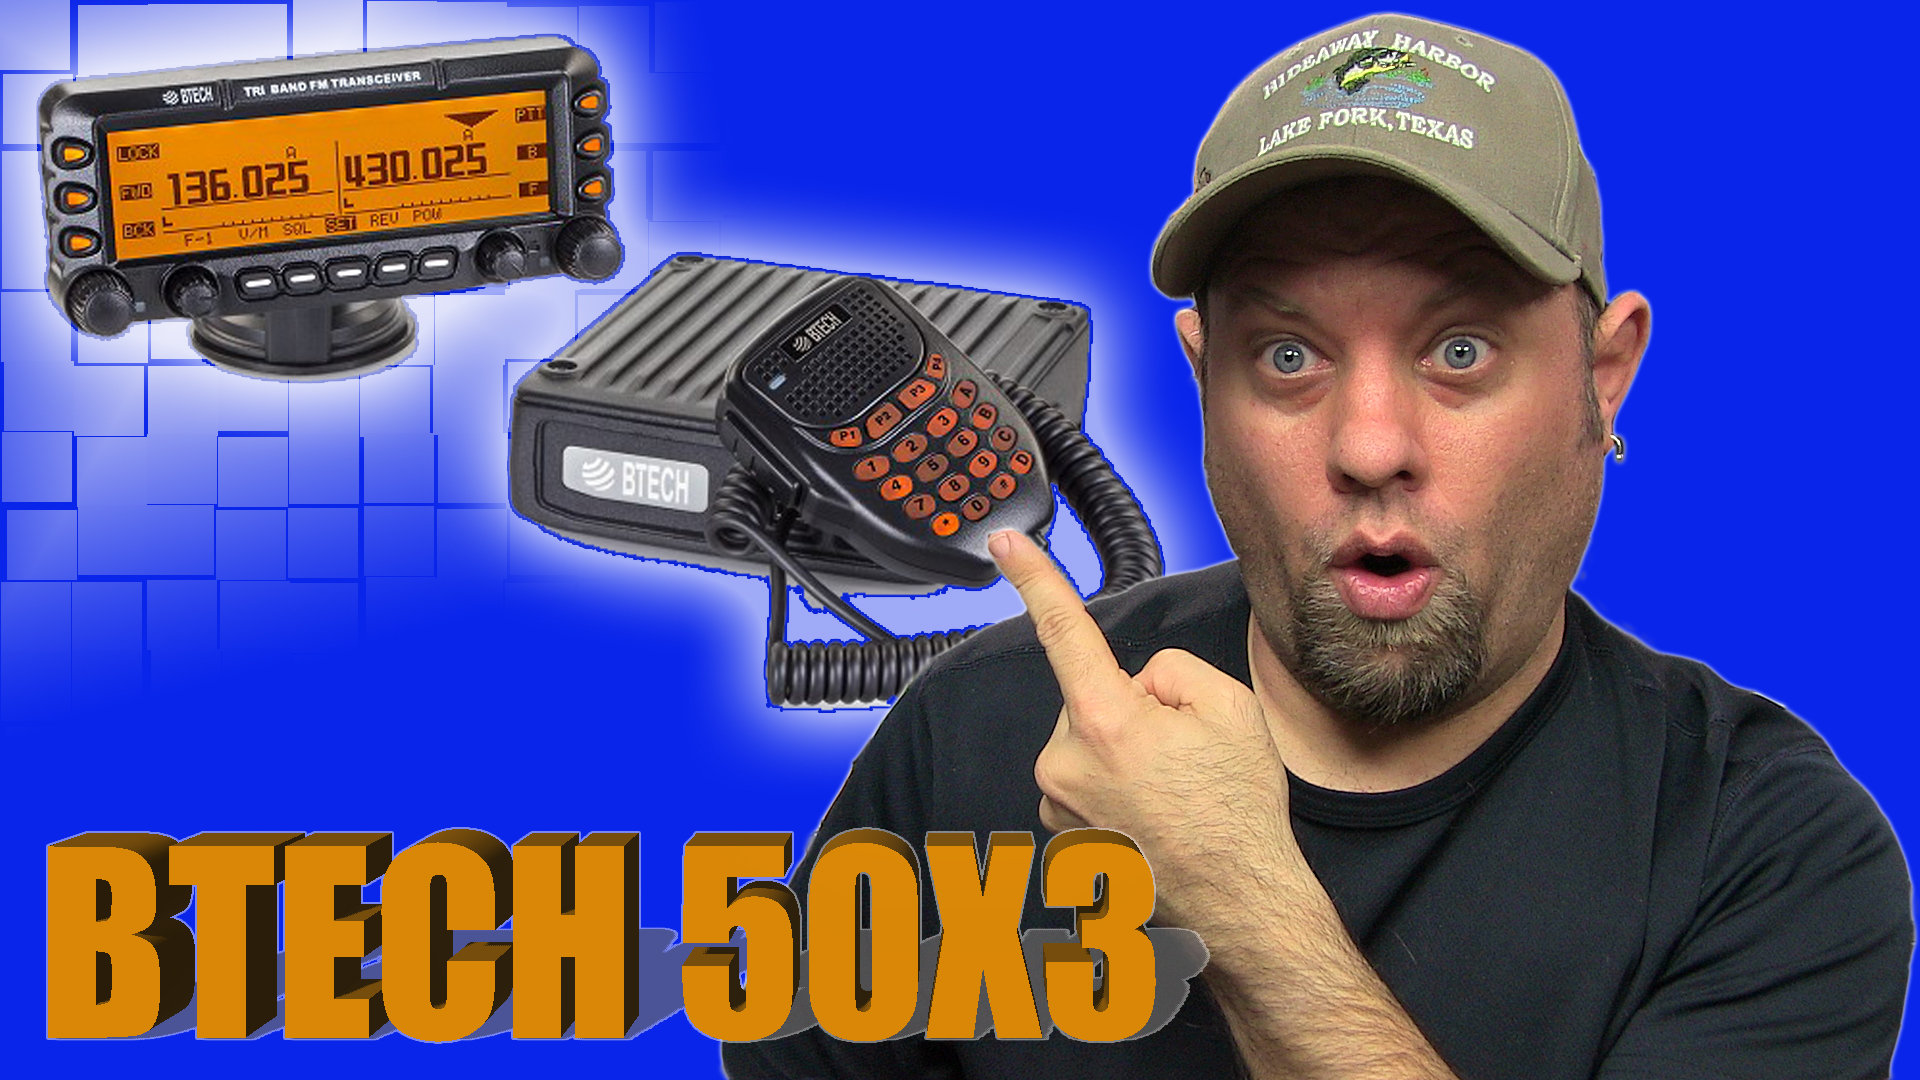 Episode 407: BaofengTech BTECH 50X3 Triband Mobile Radio Review and ...